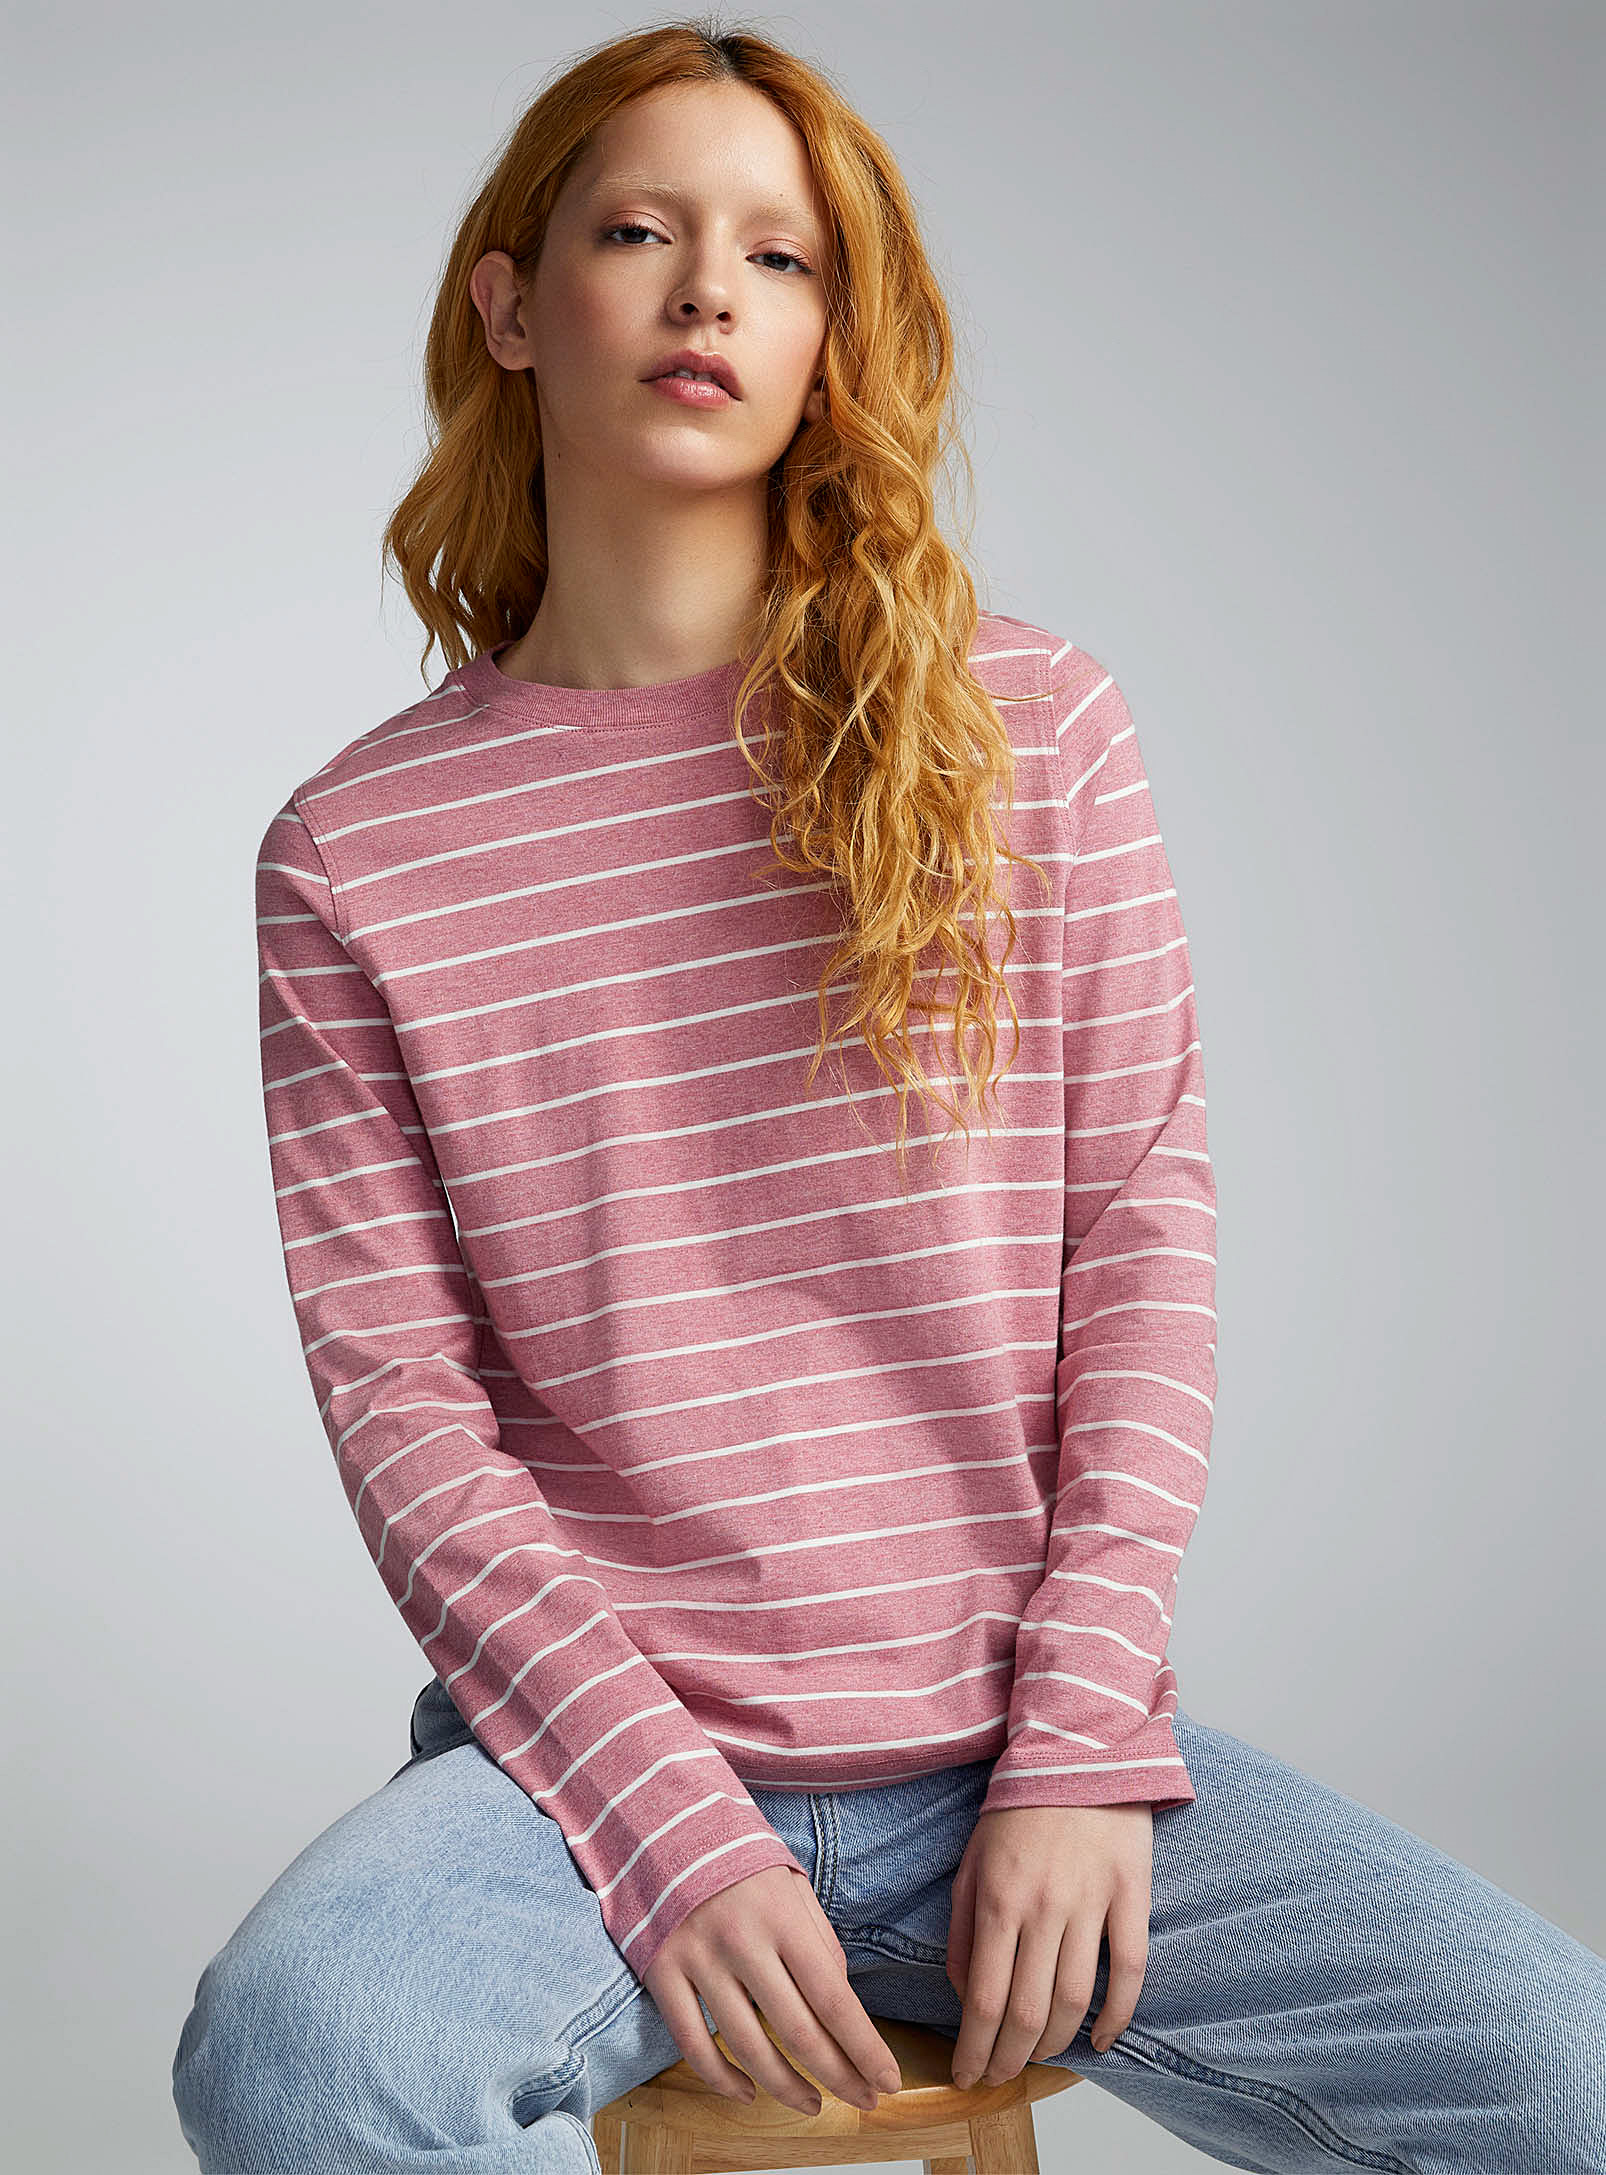 Twik Striped Long Sleeves Thin Jersey T-shirt Relaxed Fit In Medium Pink